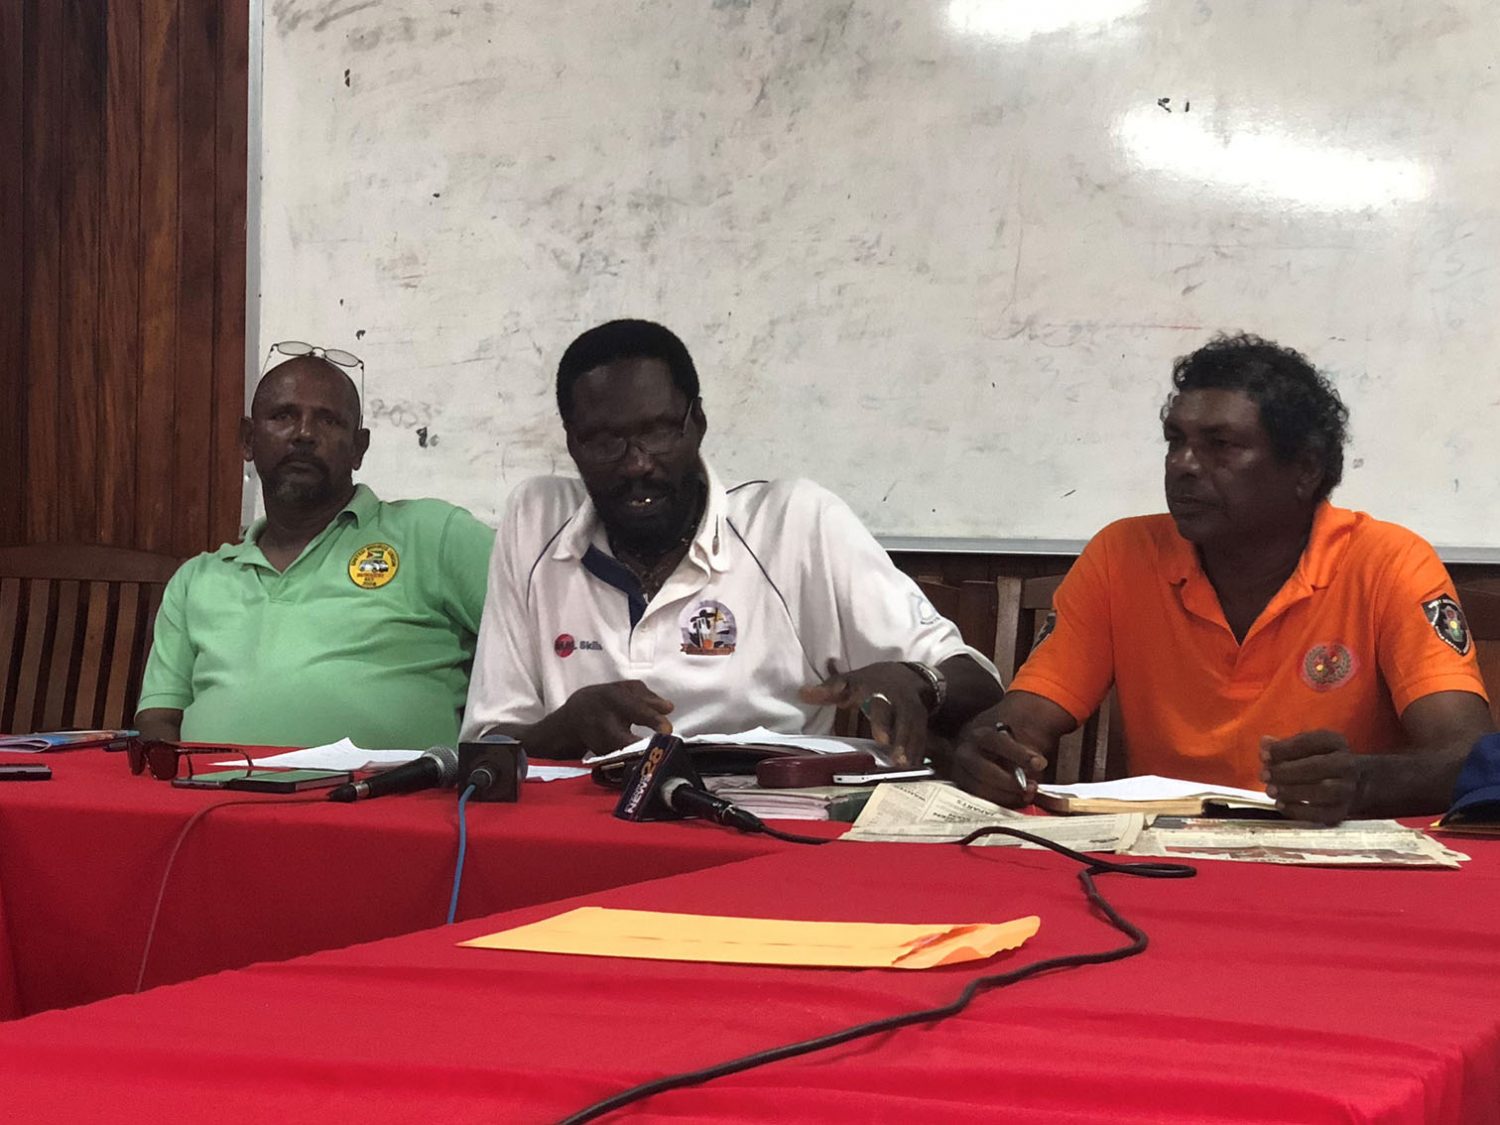 Head of the United Minibus Union Eon Andrews is flanked by Sookdeo Singh,(left), a minibus driver from the East Coast of Demerara and James Cowsil, (right), a minibus driver from the West Coast of Demerara, at yesterday’s press conference. 